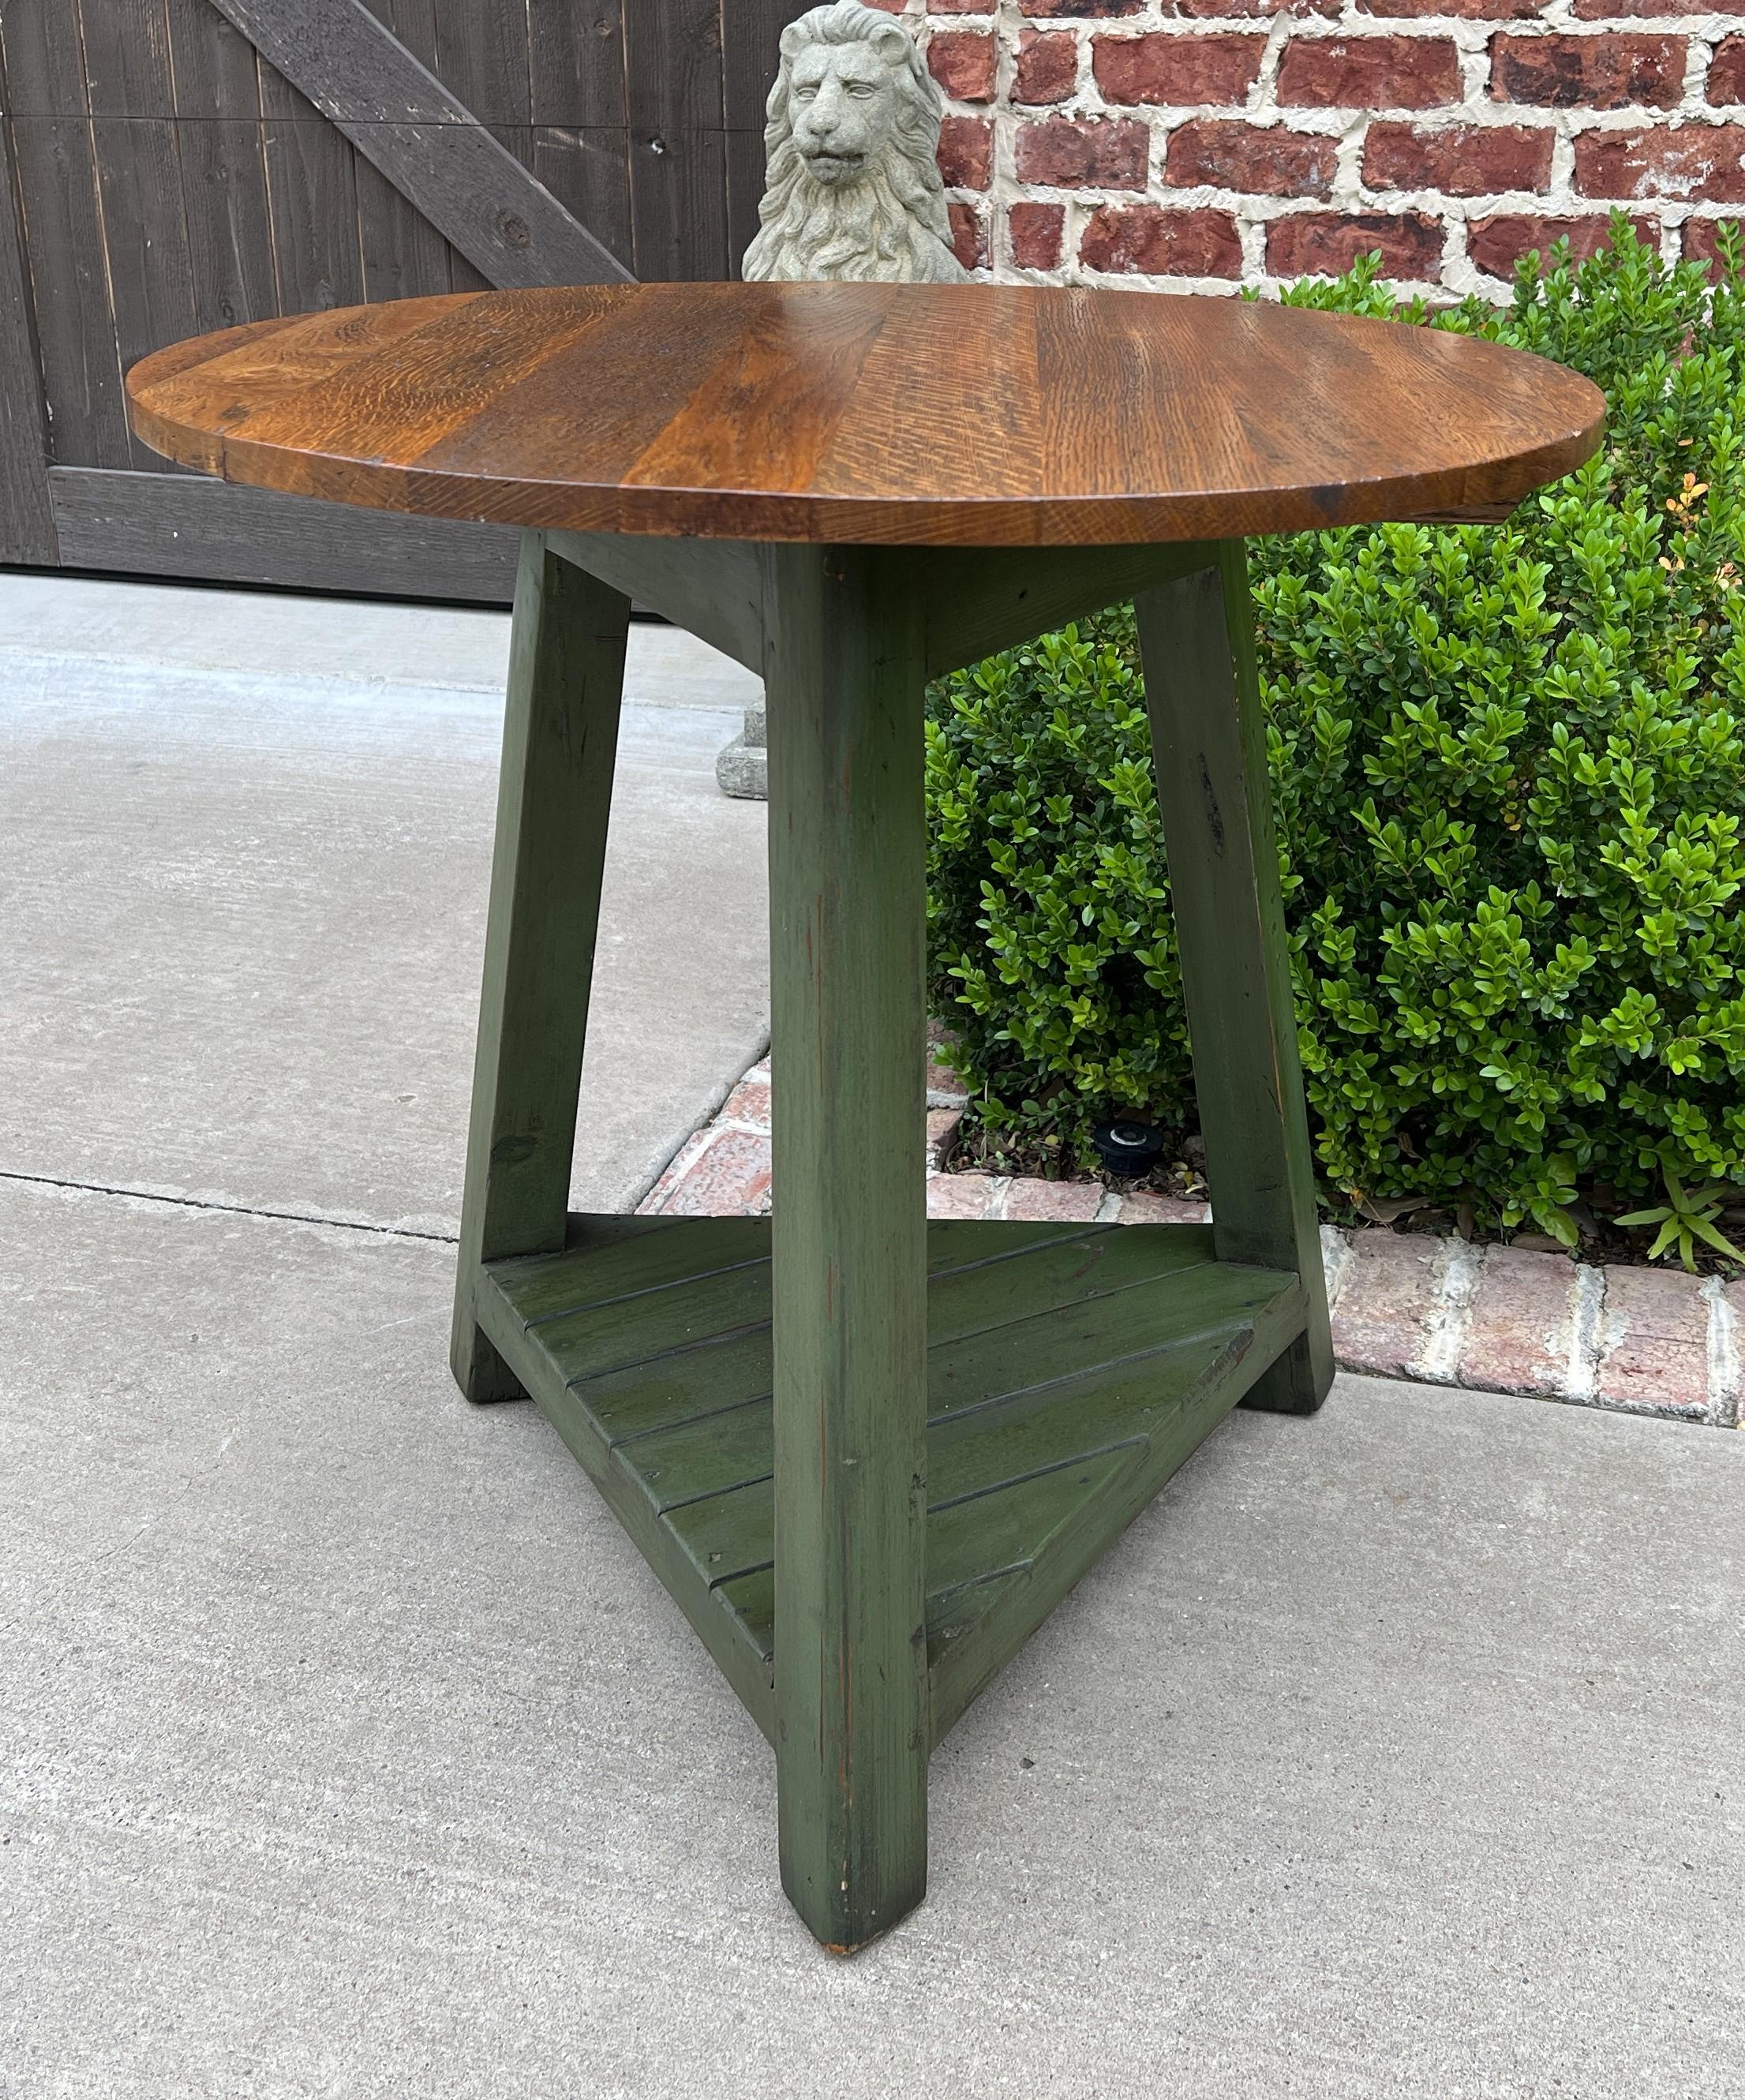 Mid-20th Century Vintage English Round Cricket Table End Table Side Table Oak 3-Legged Green Base For Sale